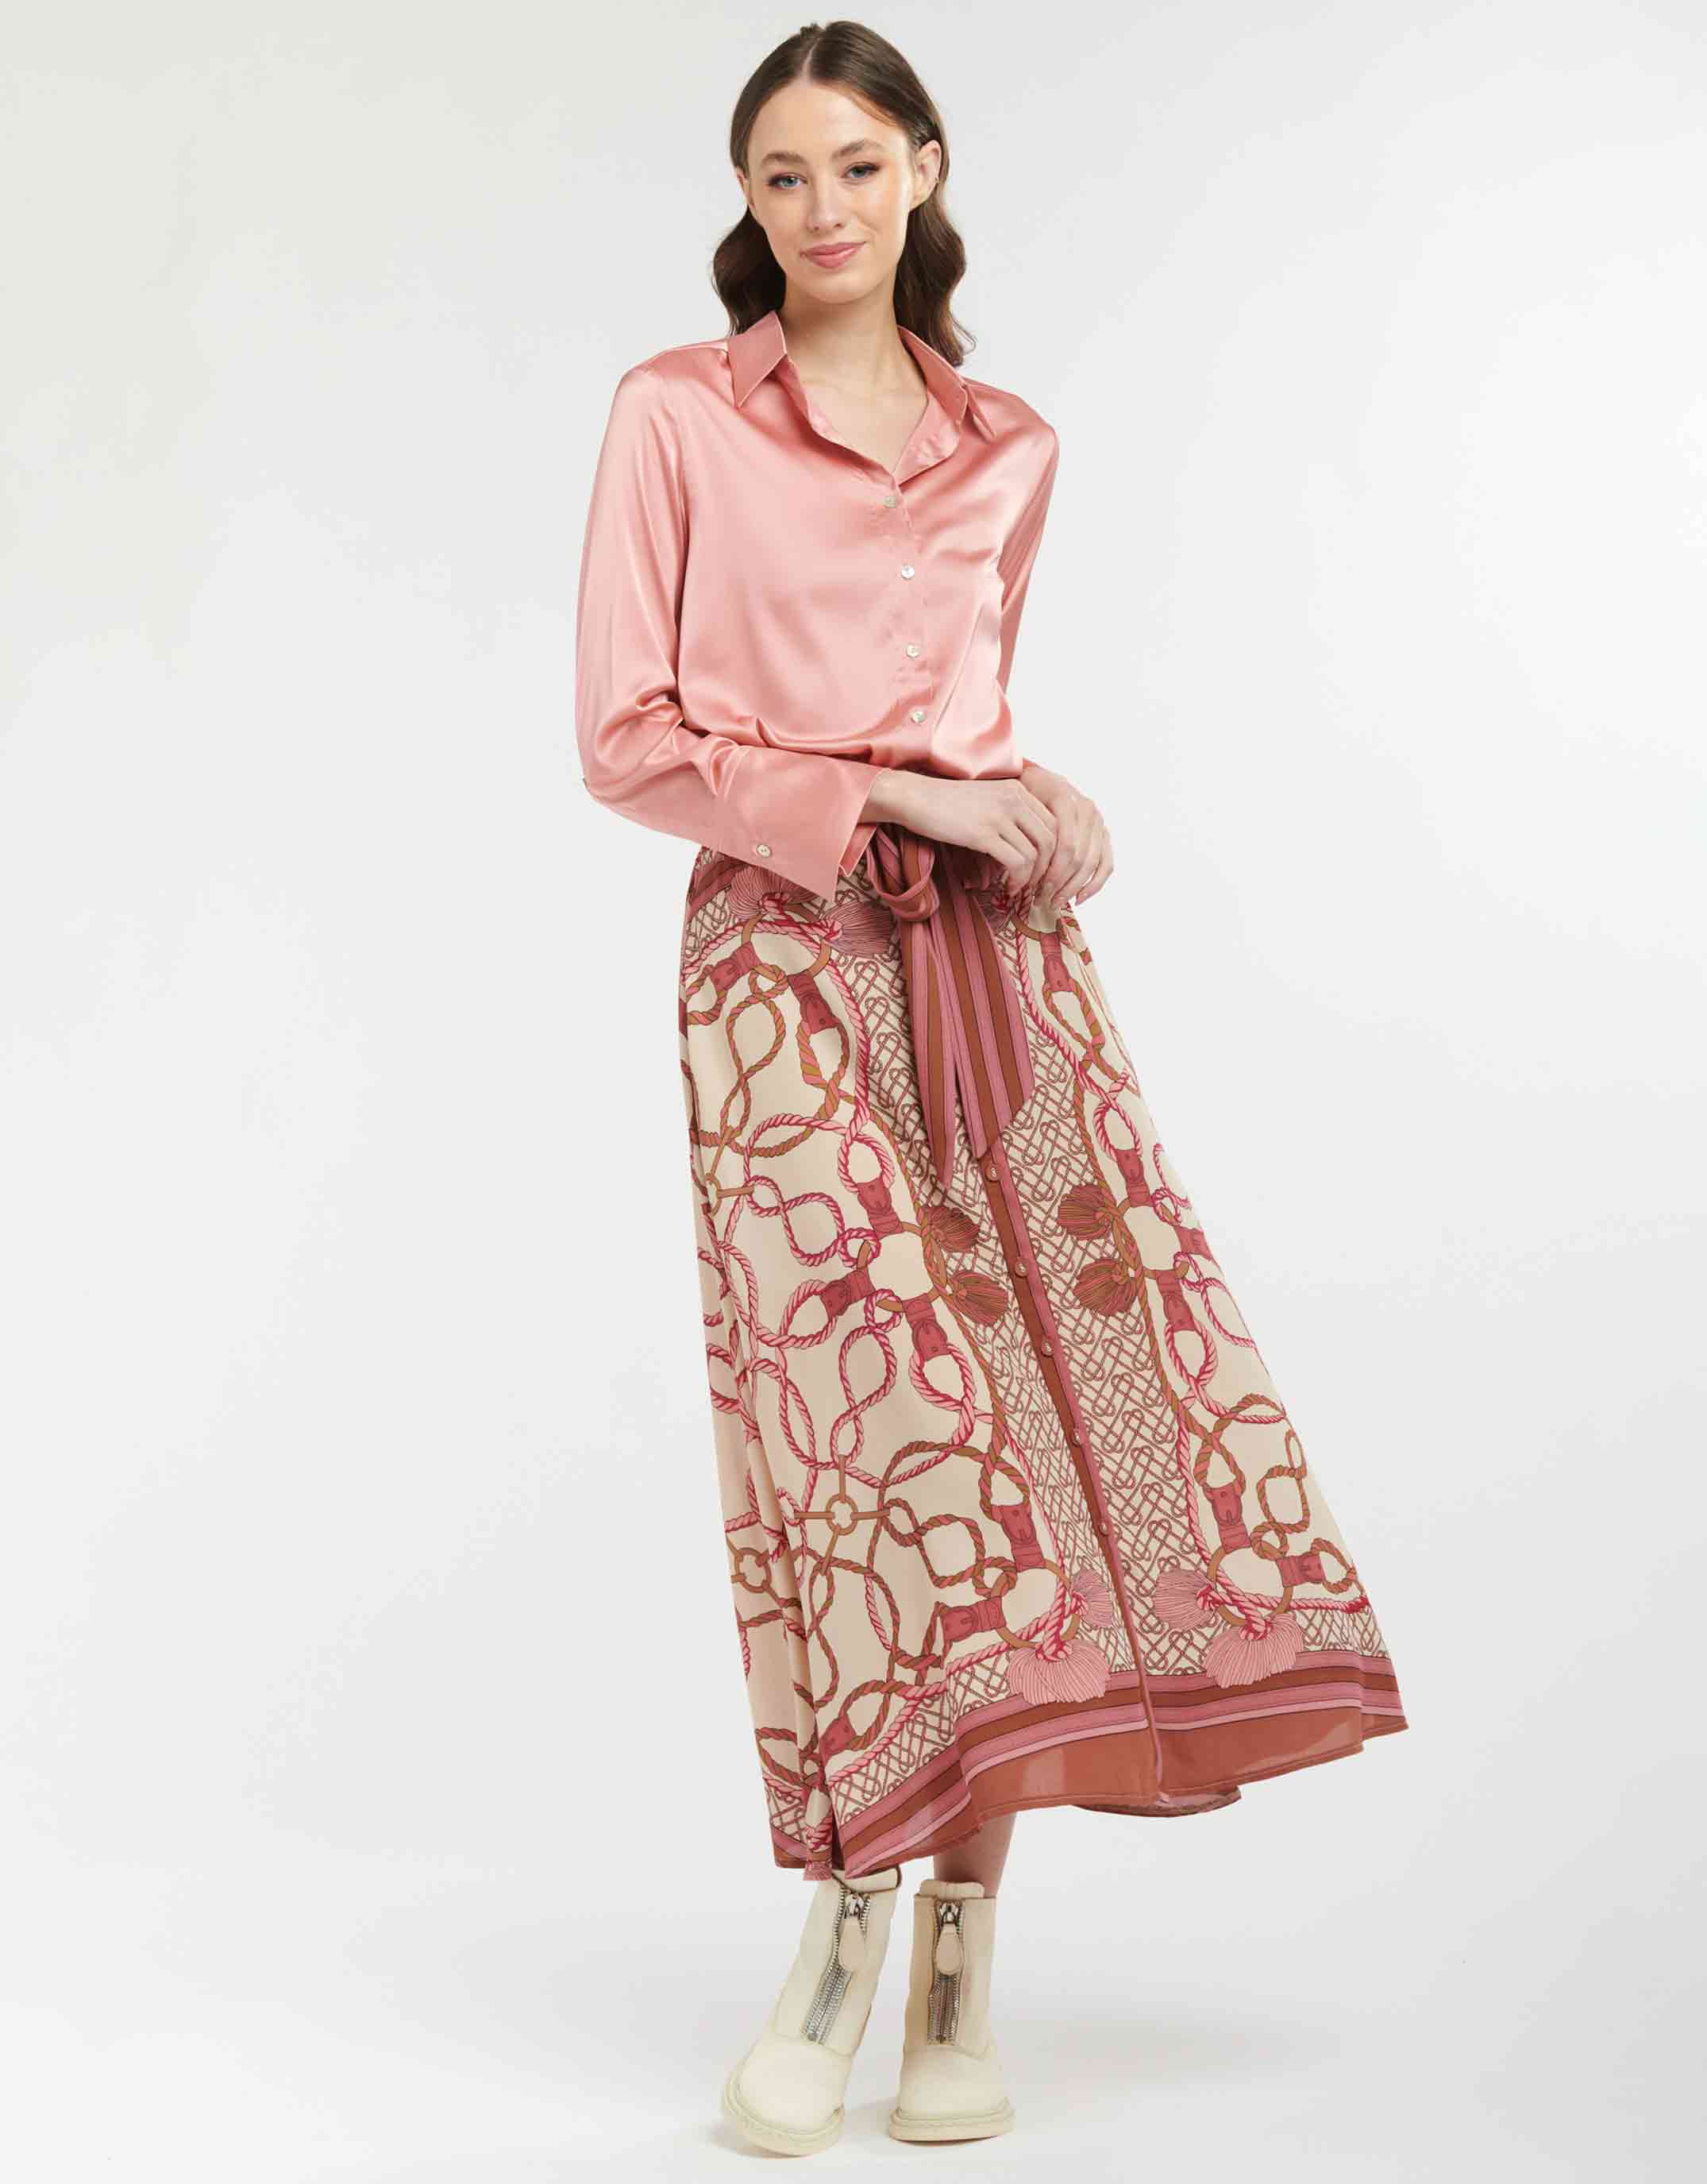 Button Skirt - Imperial Pink